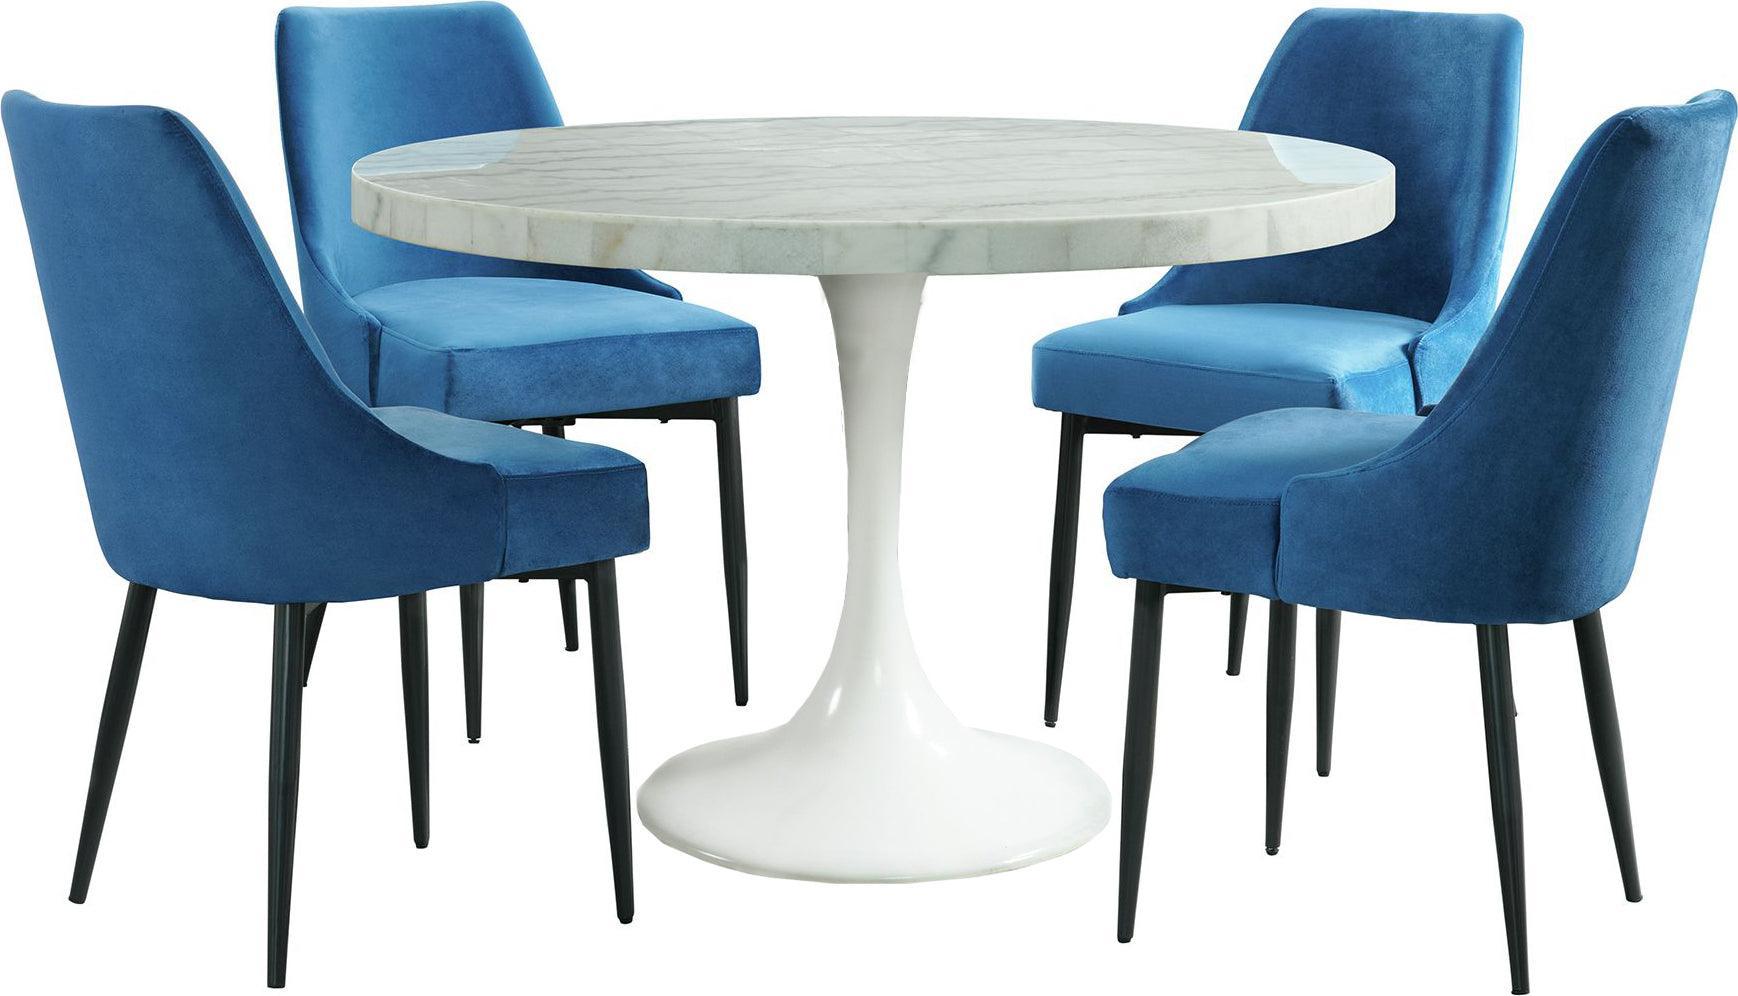 Elements Dining Sets - Mardelle 5PC Dining Set-Table & Four Blue Side Chairs